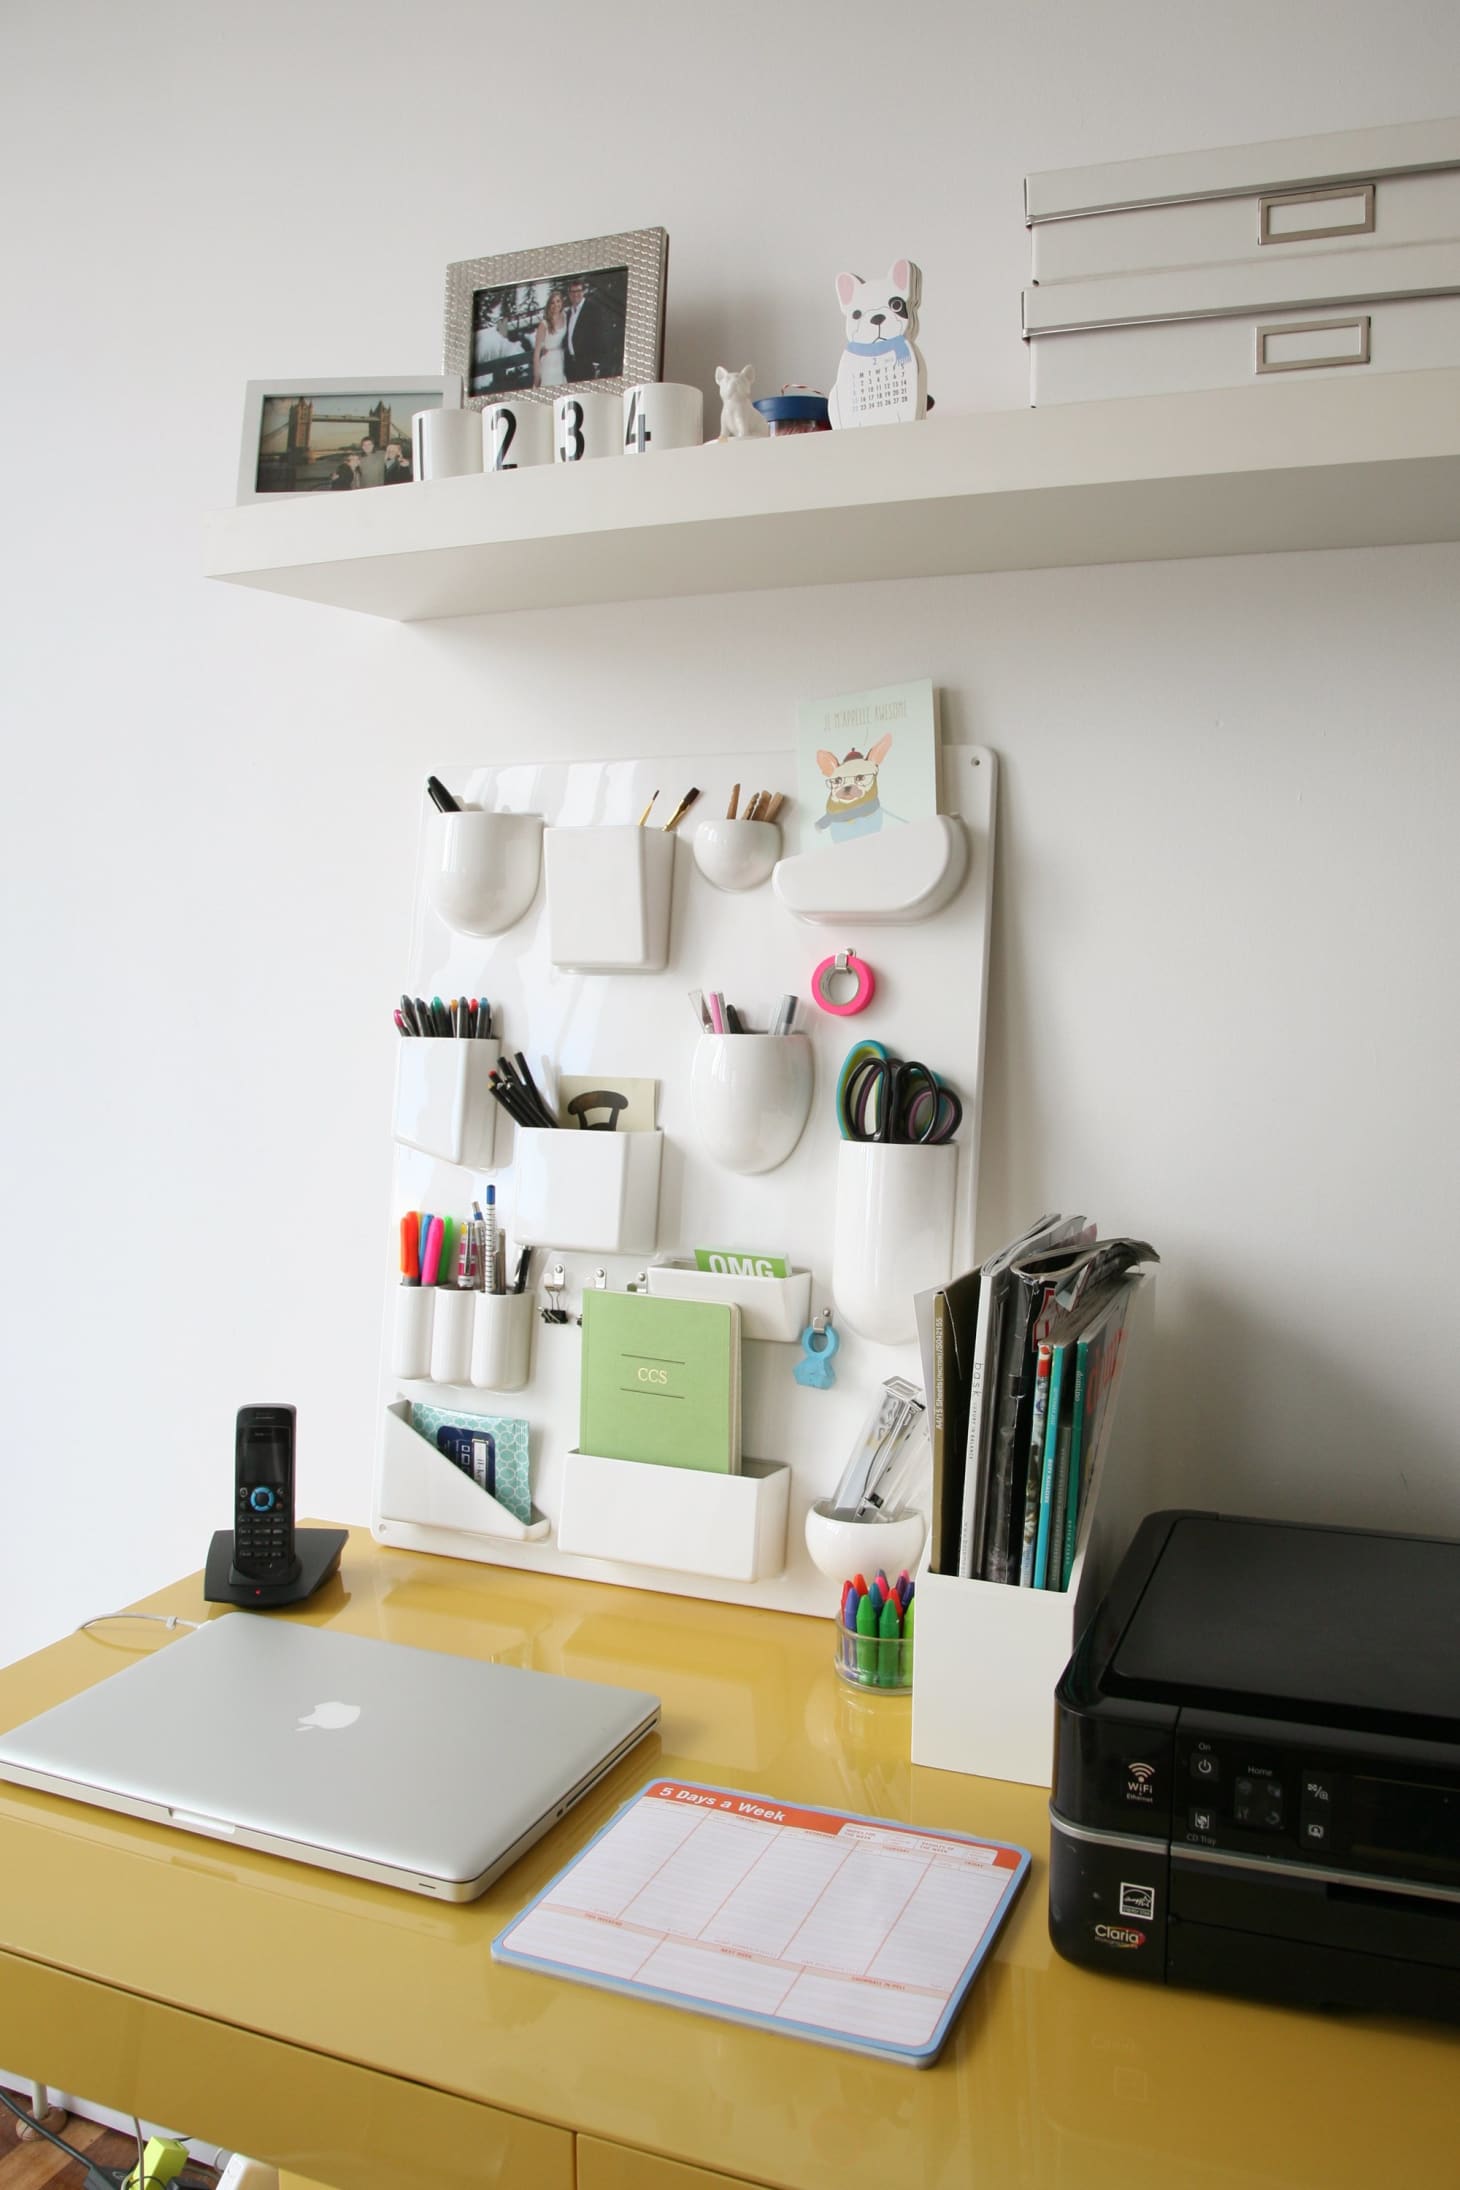 5 Ways to Organize a Desk Without Drawers | Apartment Therapy